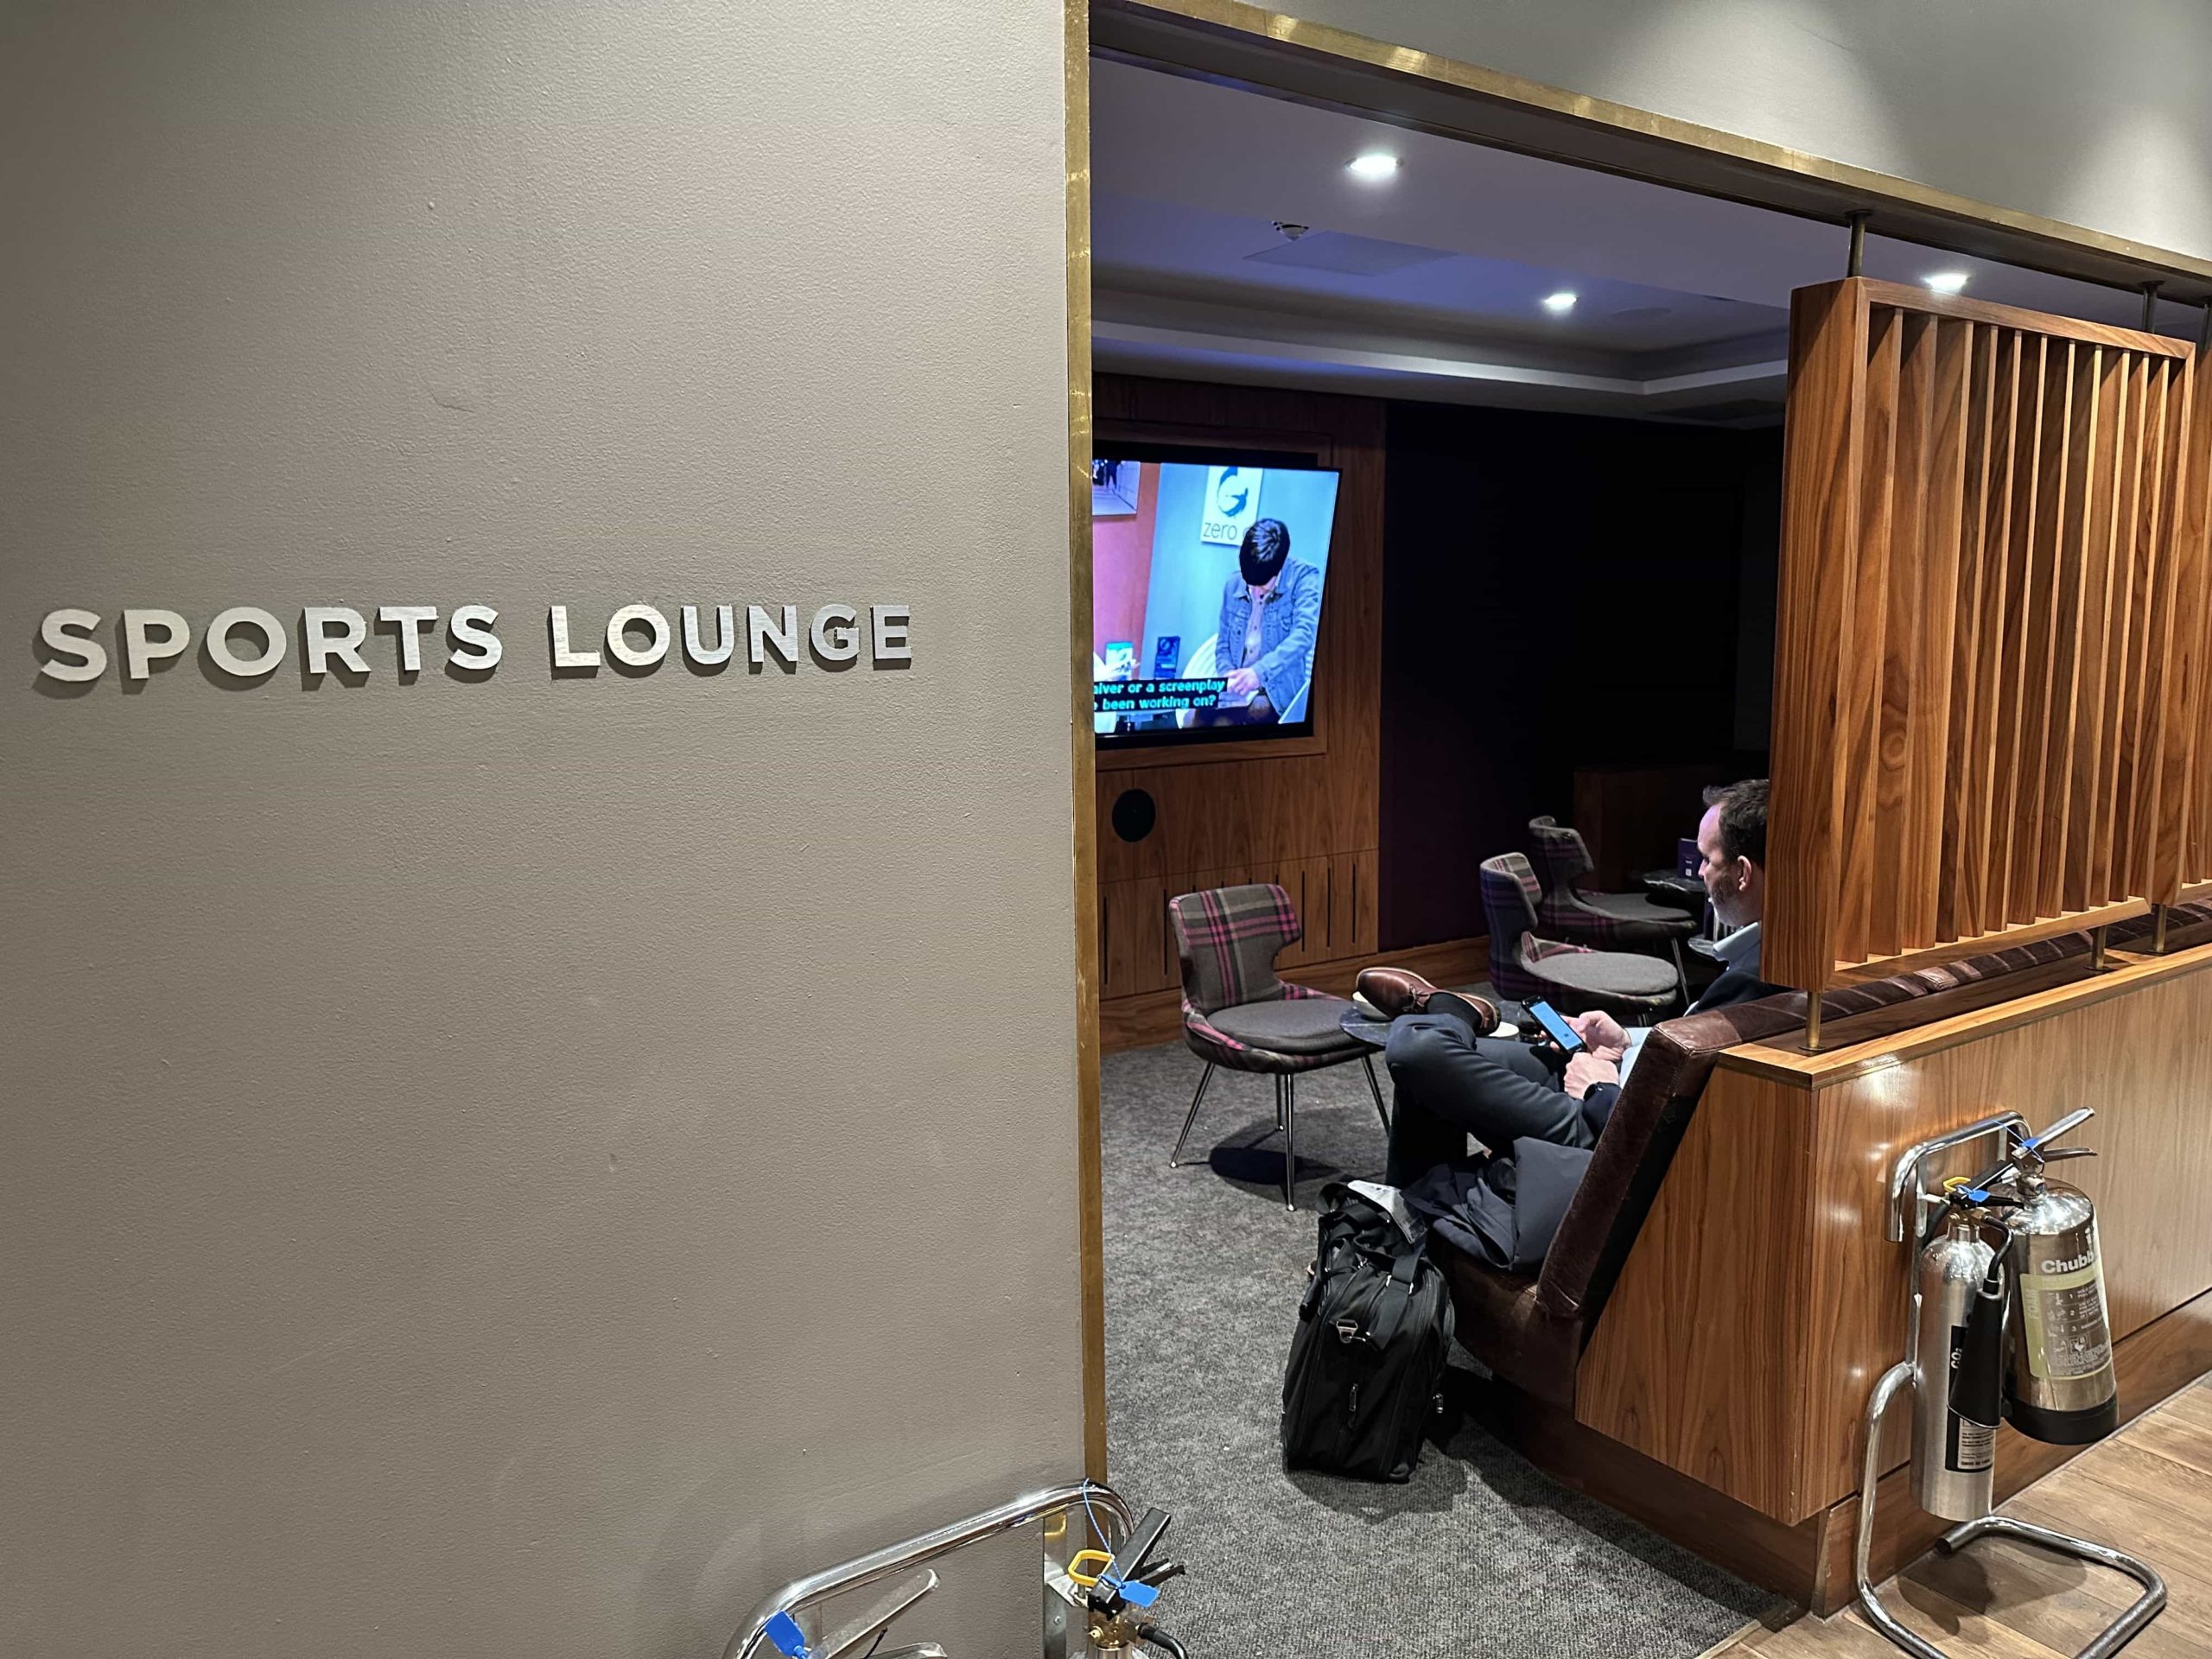 A 'sports lounge' room with seating and a wall-mounted TV